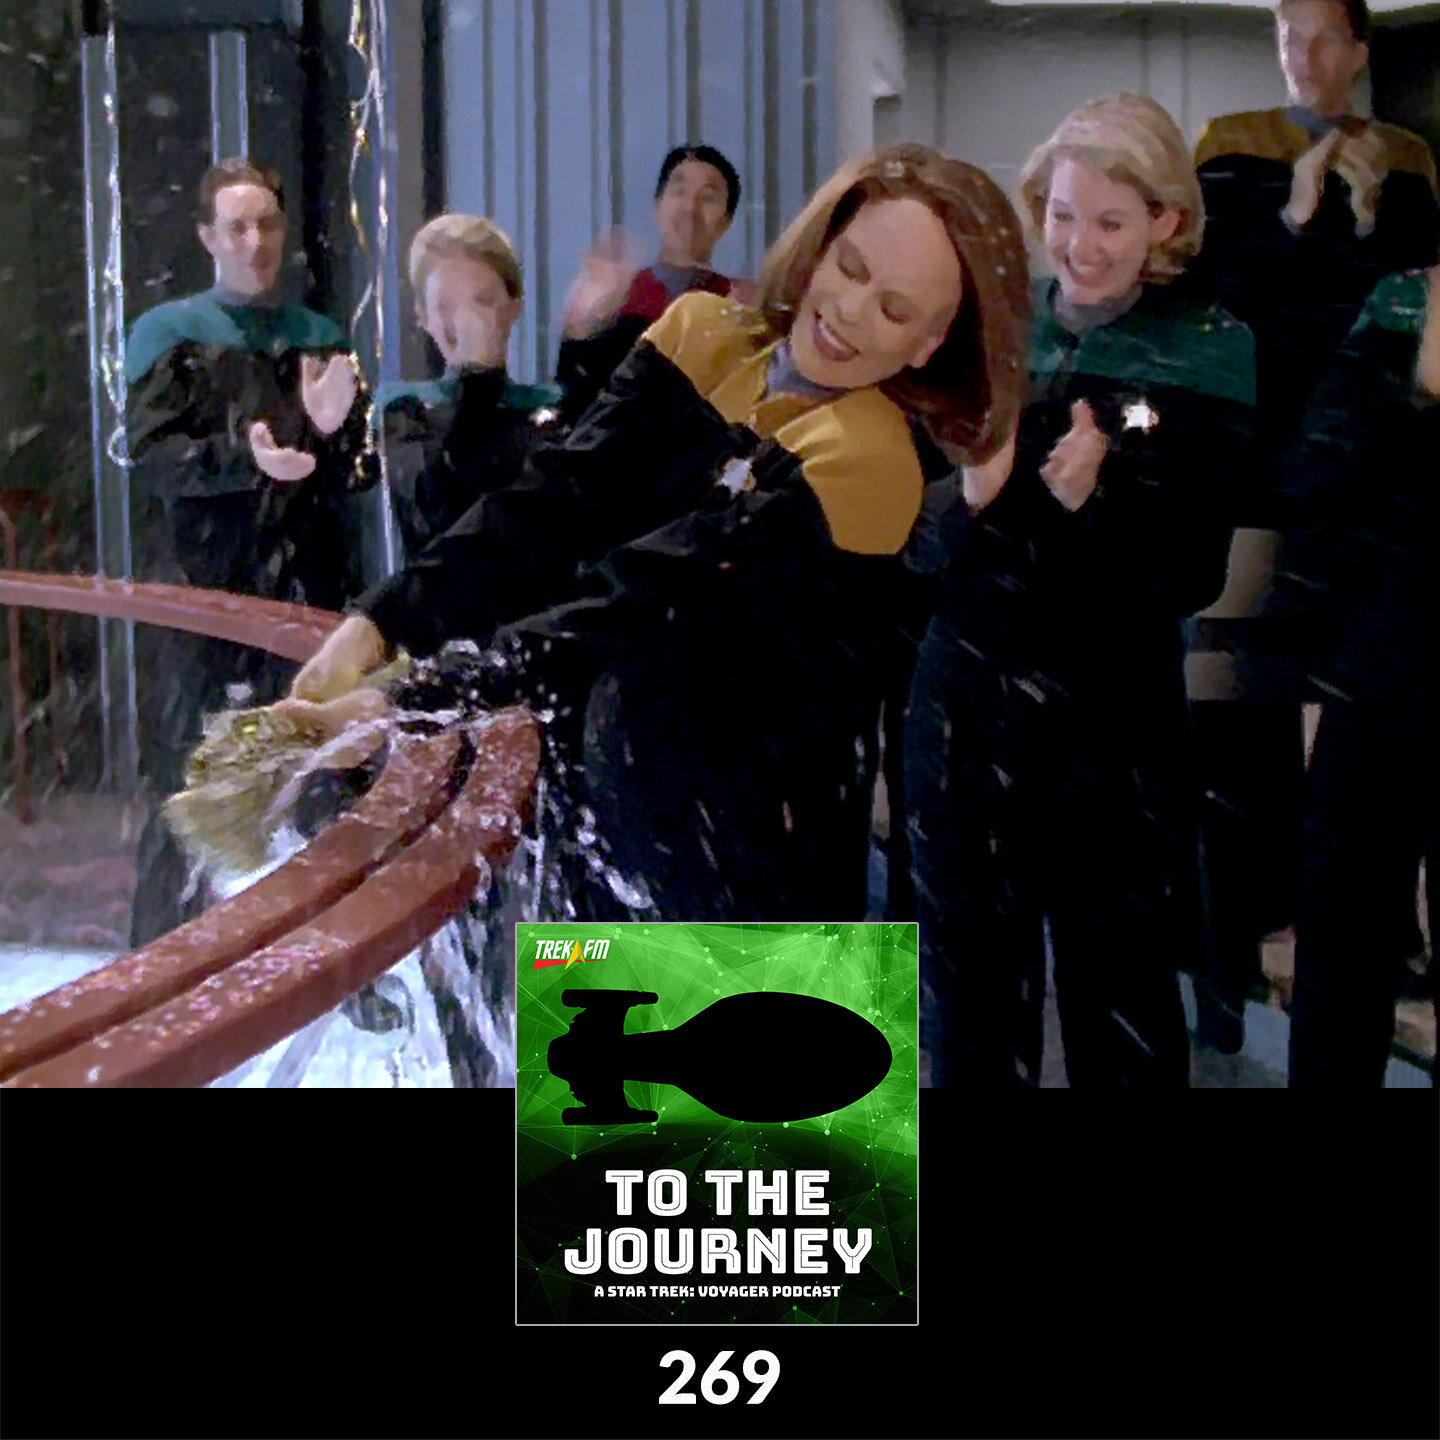 To The Journey 269: 1990s Clickbait - 25th Anniversary of Voyager.